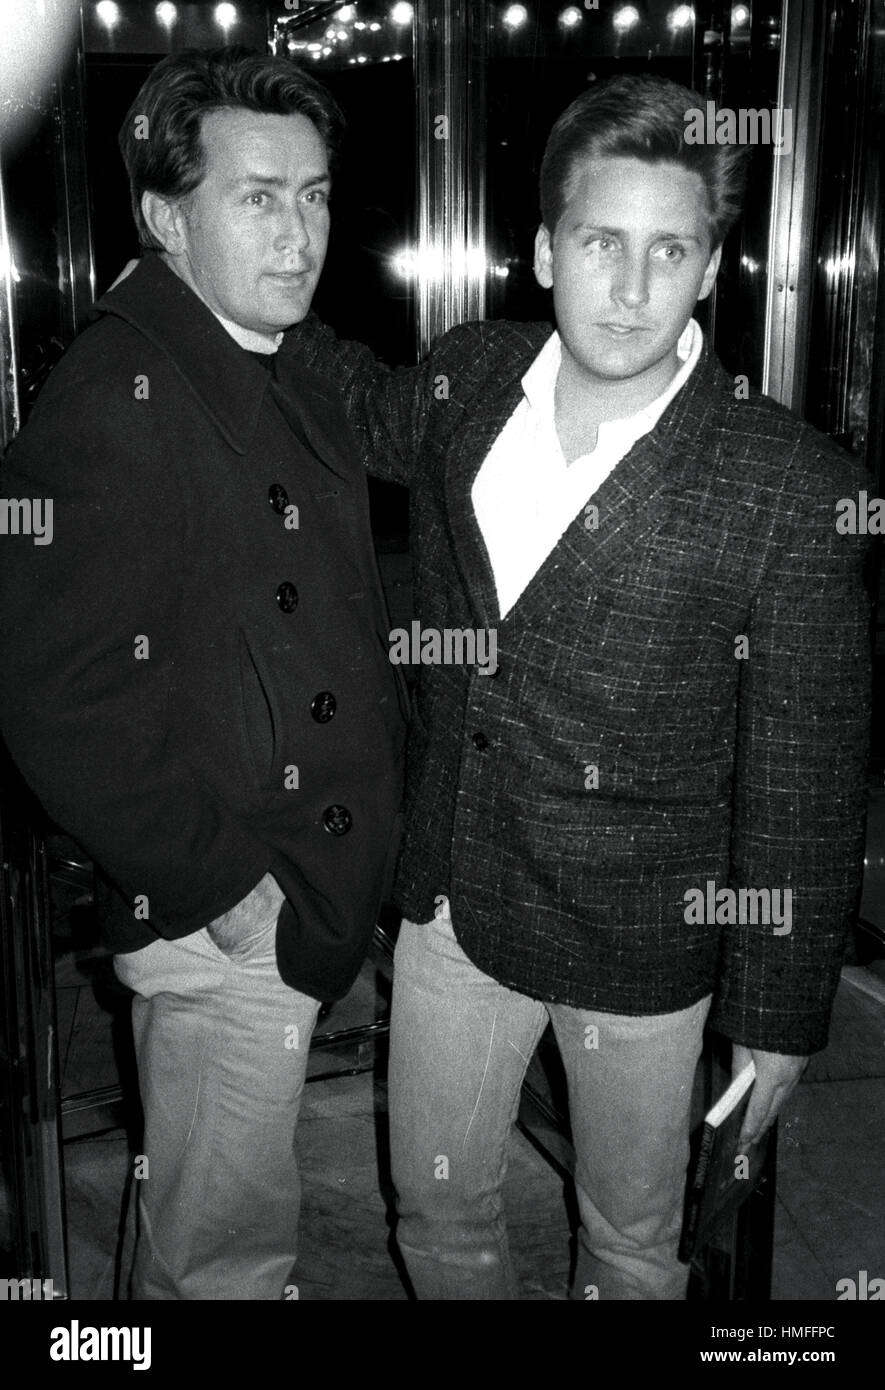 Martin Sheen with his son Emilio Estevez Arriving at the Parker Meriden Hotel in New York City. Stock Photo